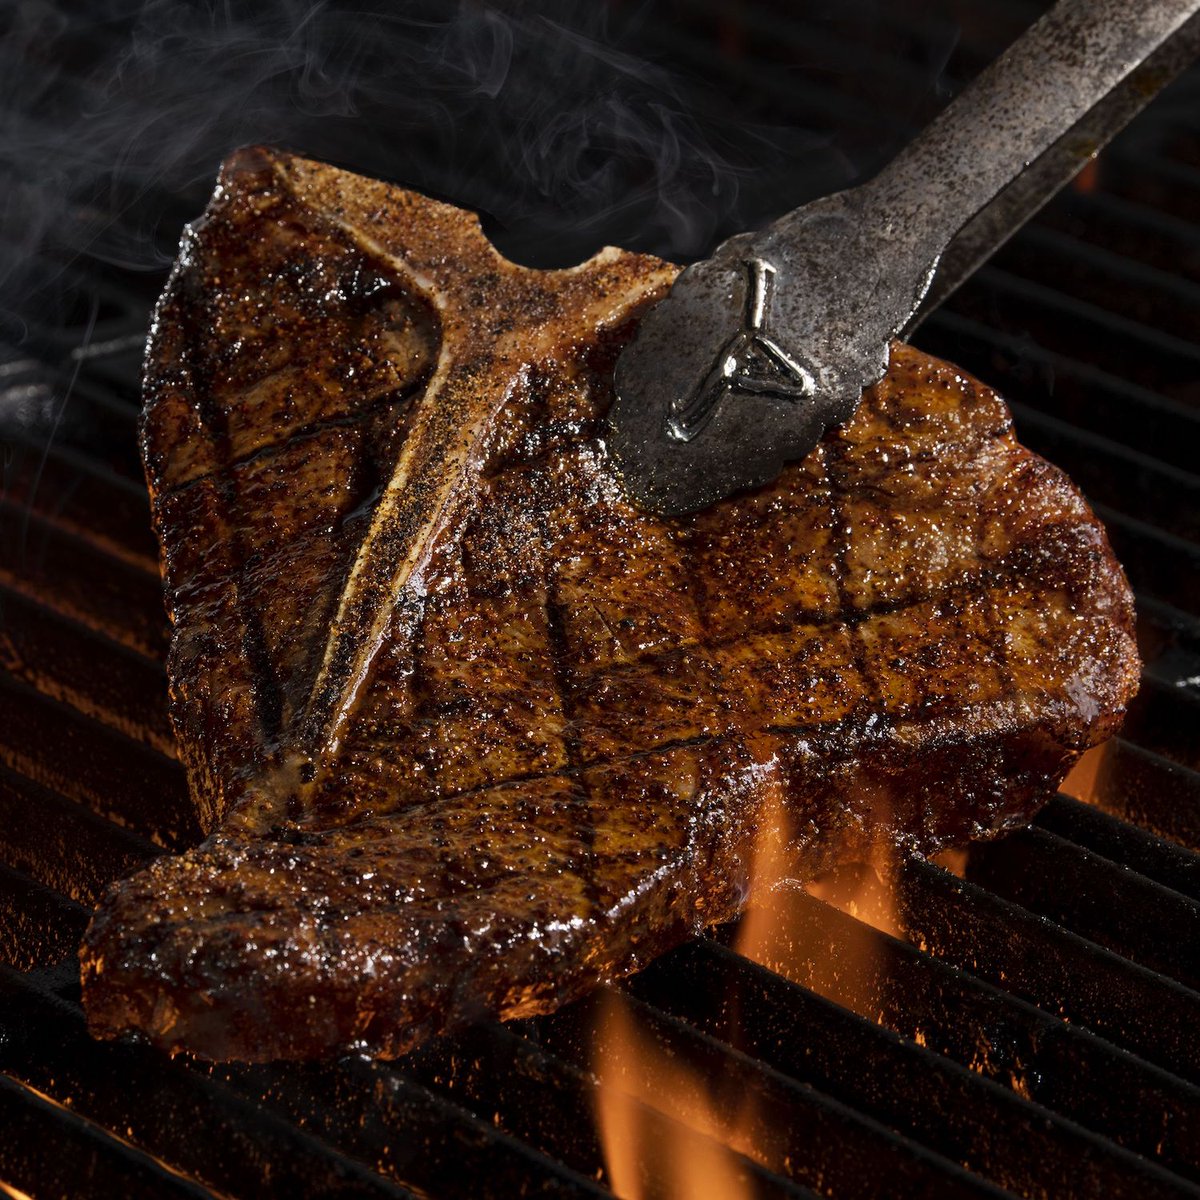 We don't fool around when it comes to steak.